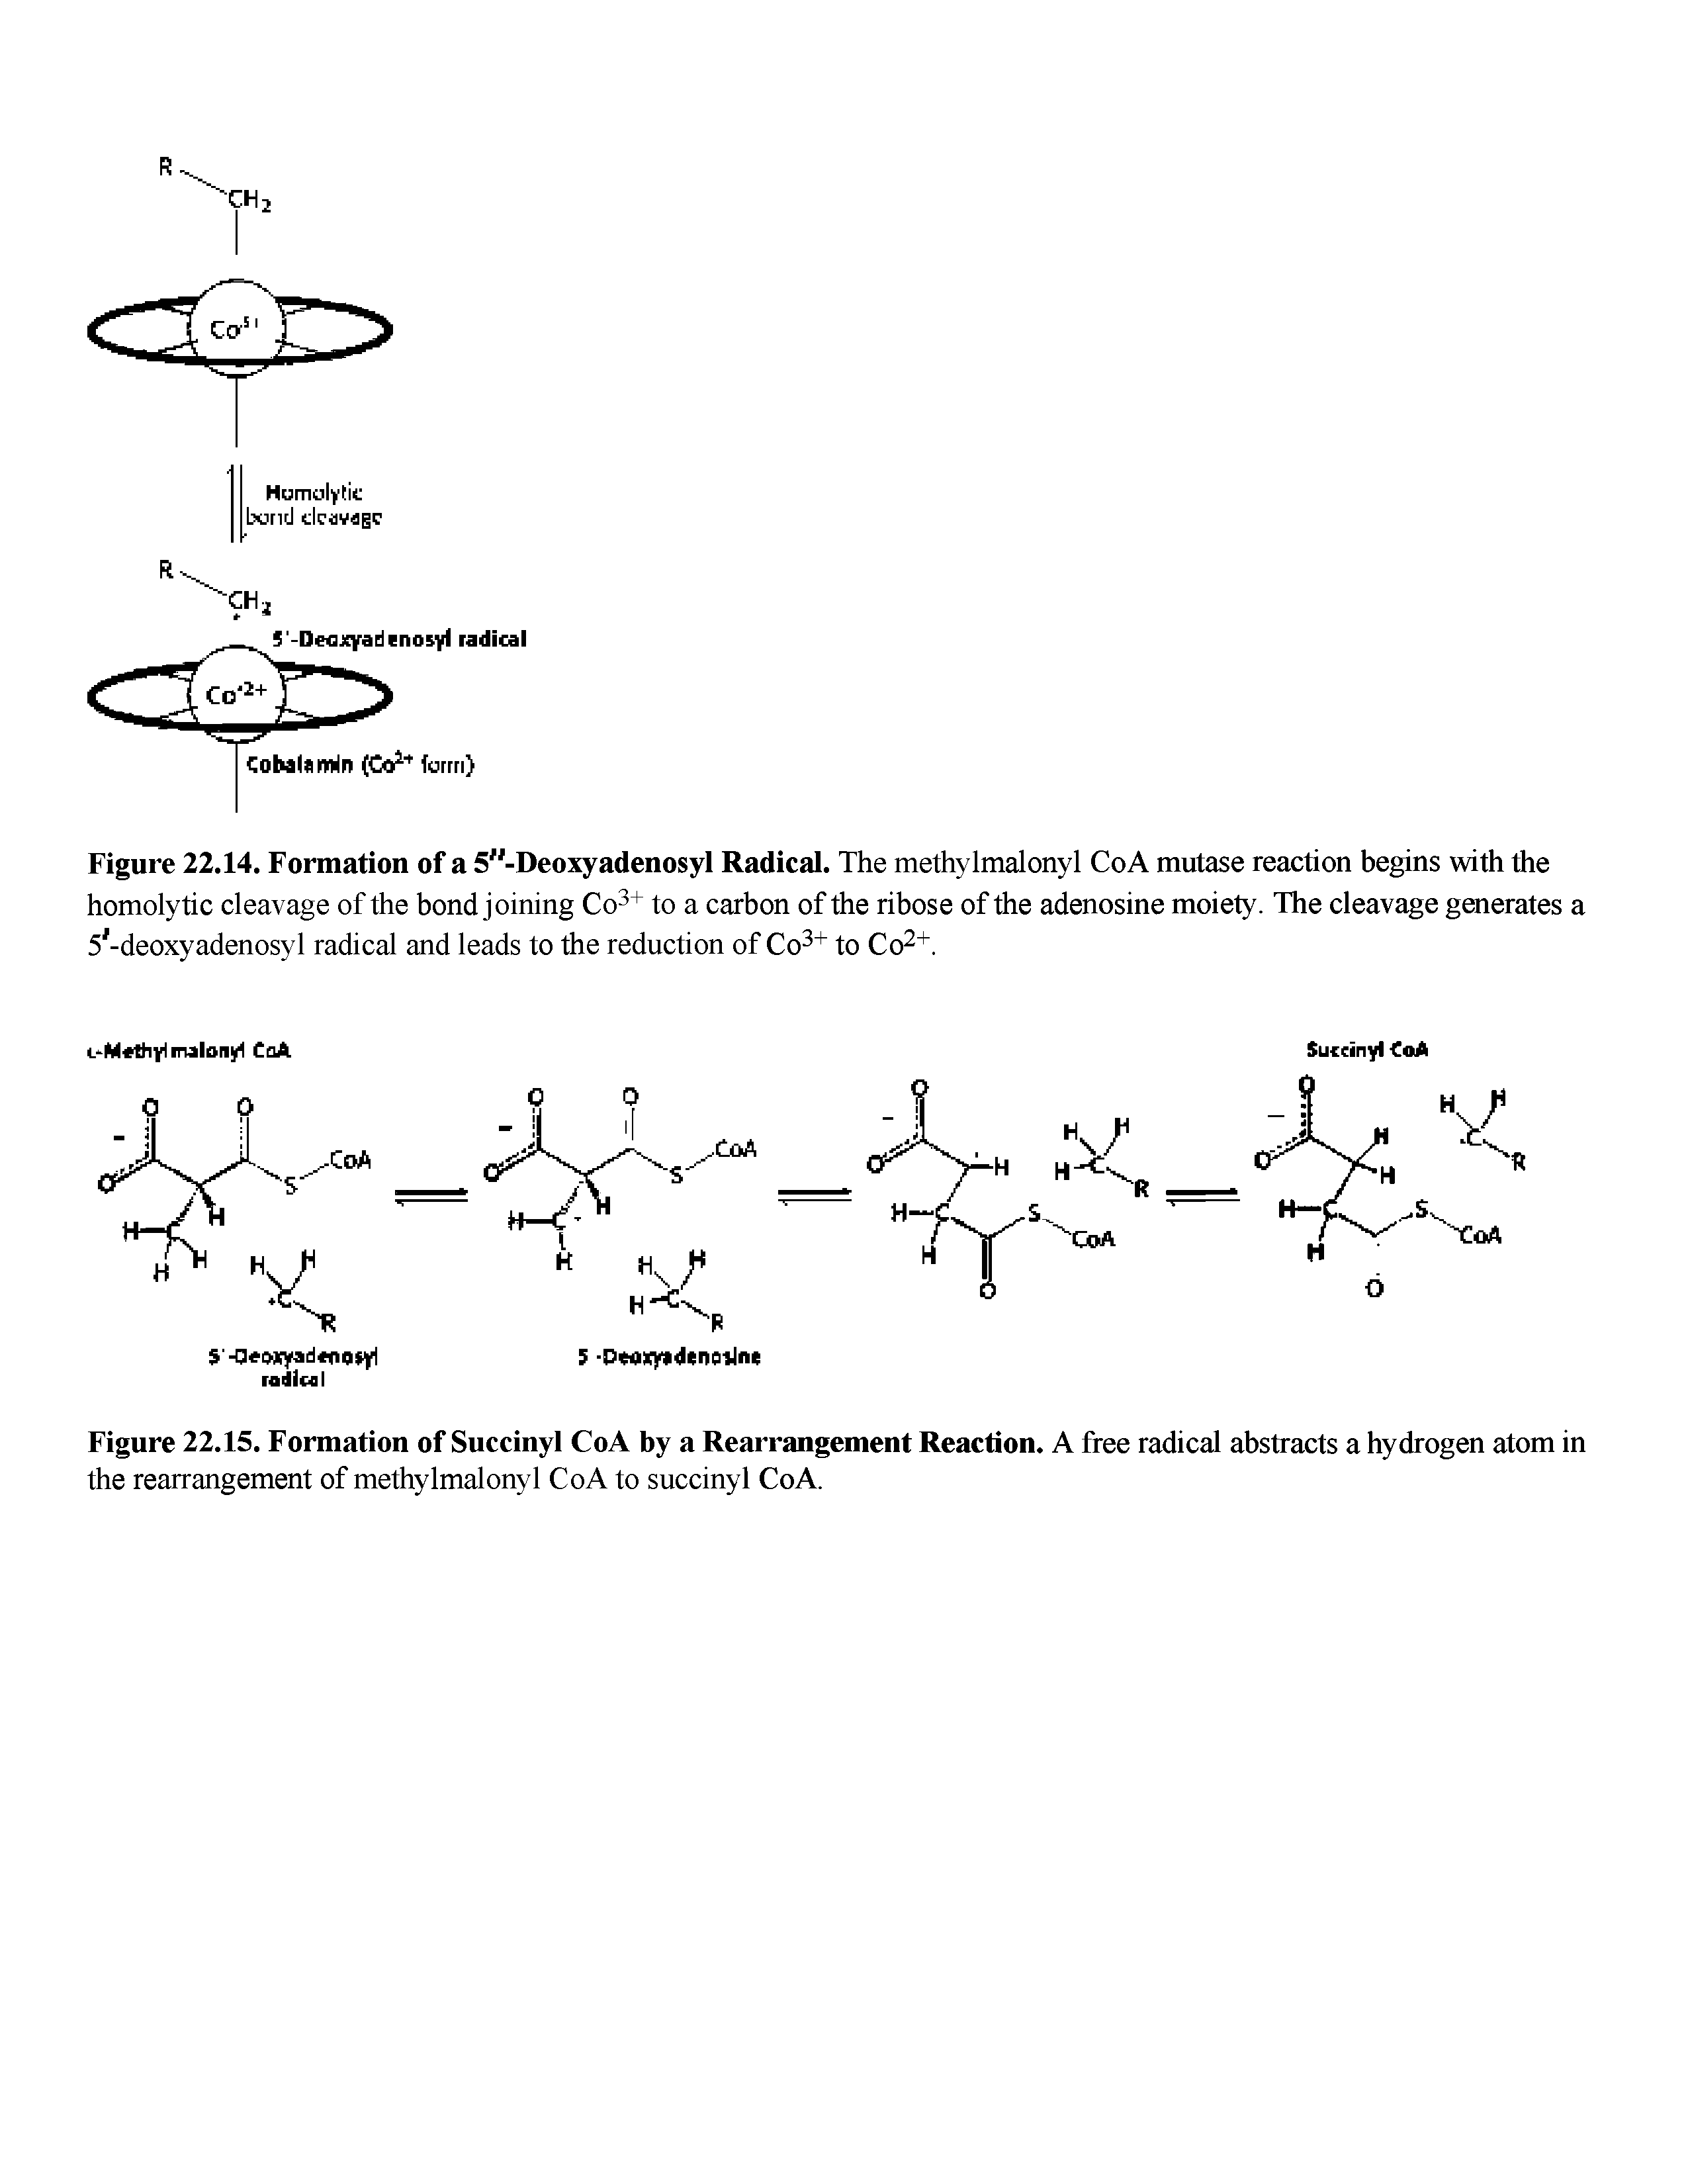 Figure 22.14. Formation of a 5"-Deoxyadenosyl Radical. The methylmalonyl Co A mutase reaction begins with the homolytic cleavage of the bond joining Co3+ to a carbon of the ribose of the adenosine moiety. The cleavage generates a 5 -deoxyadenosyl radical and leads to the reduction of 0 + to 0 +.